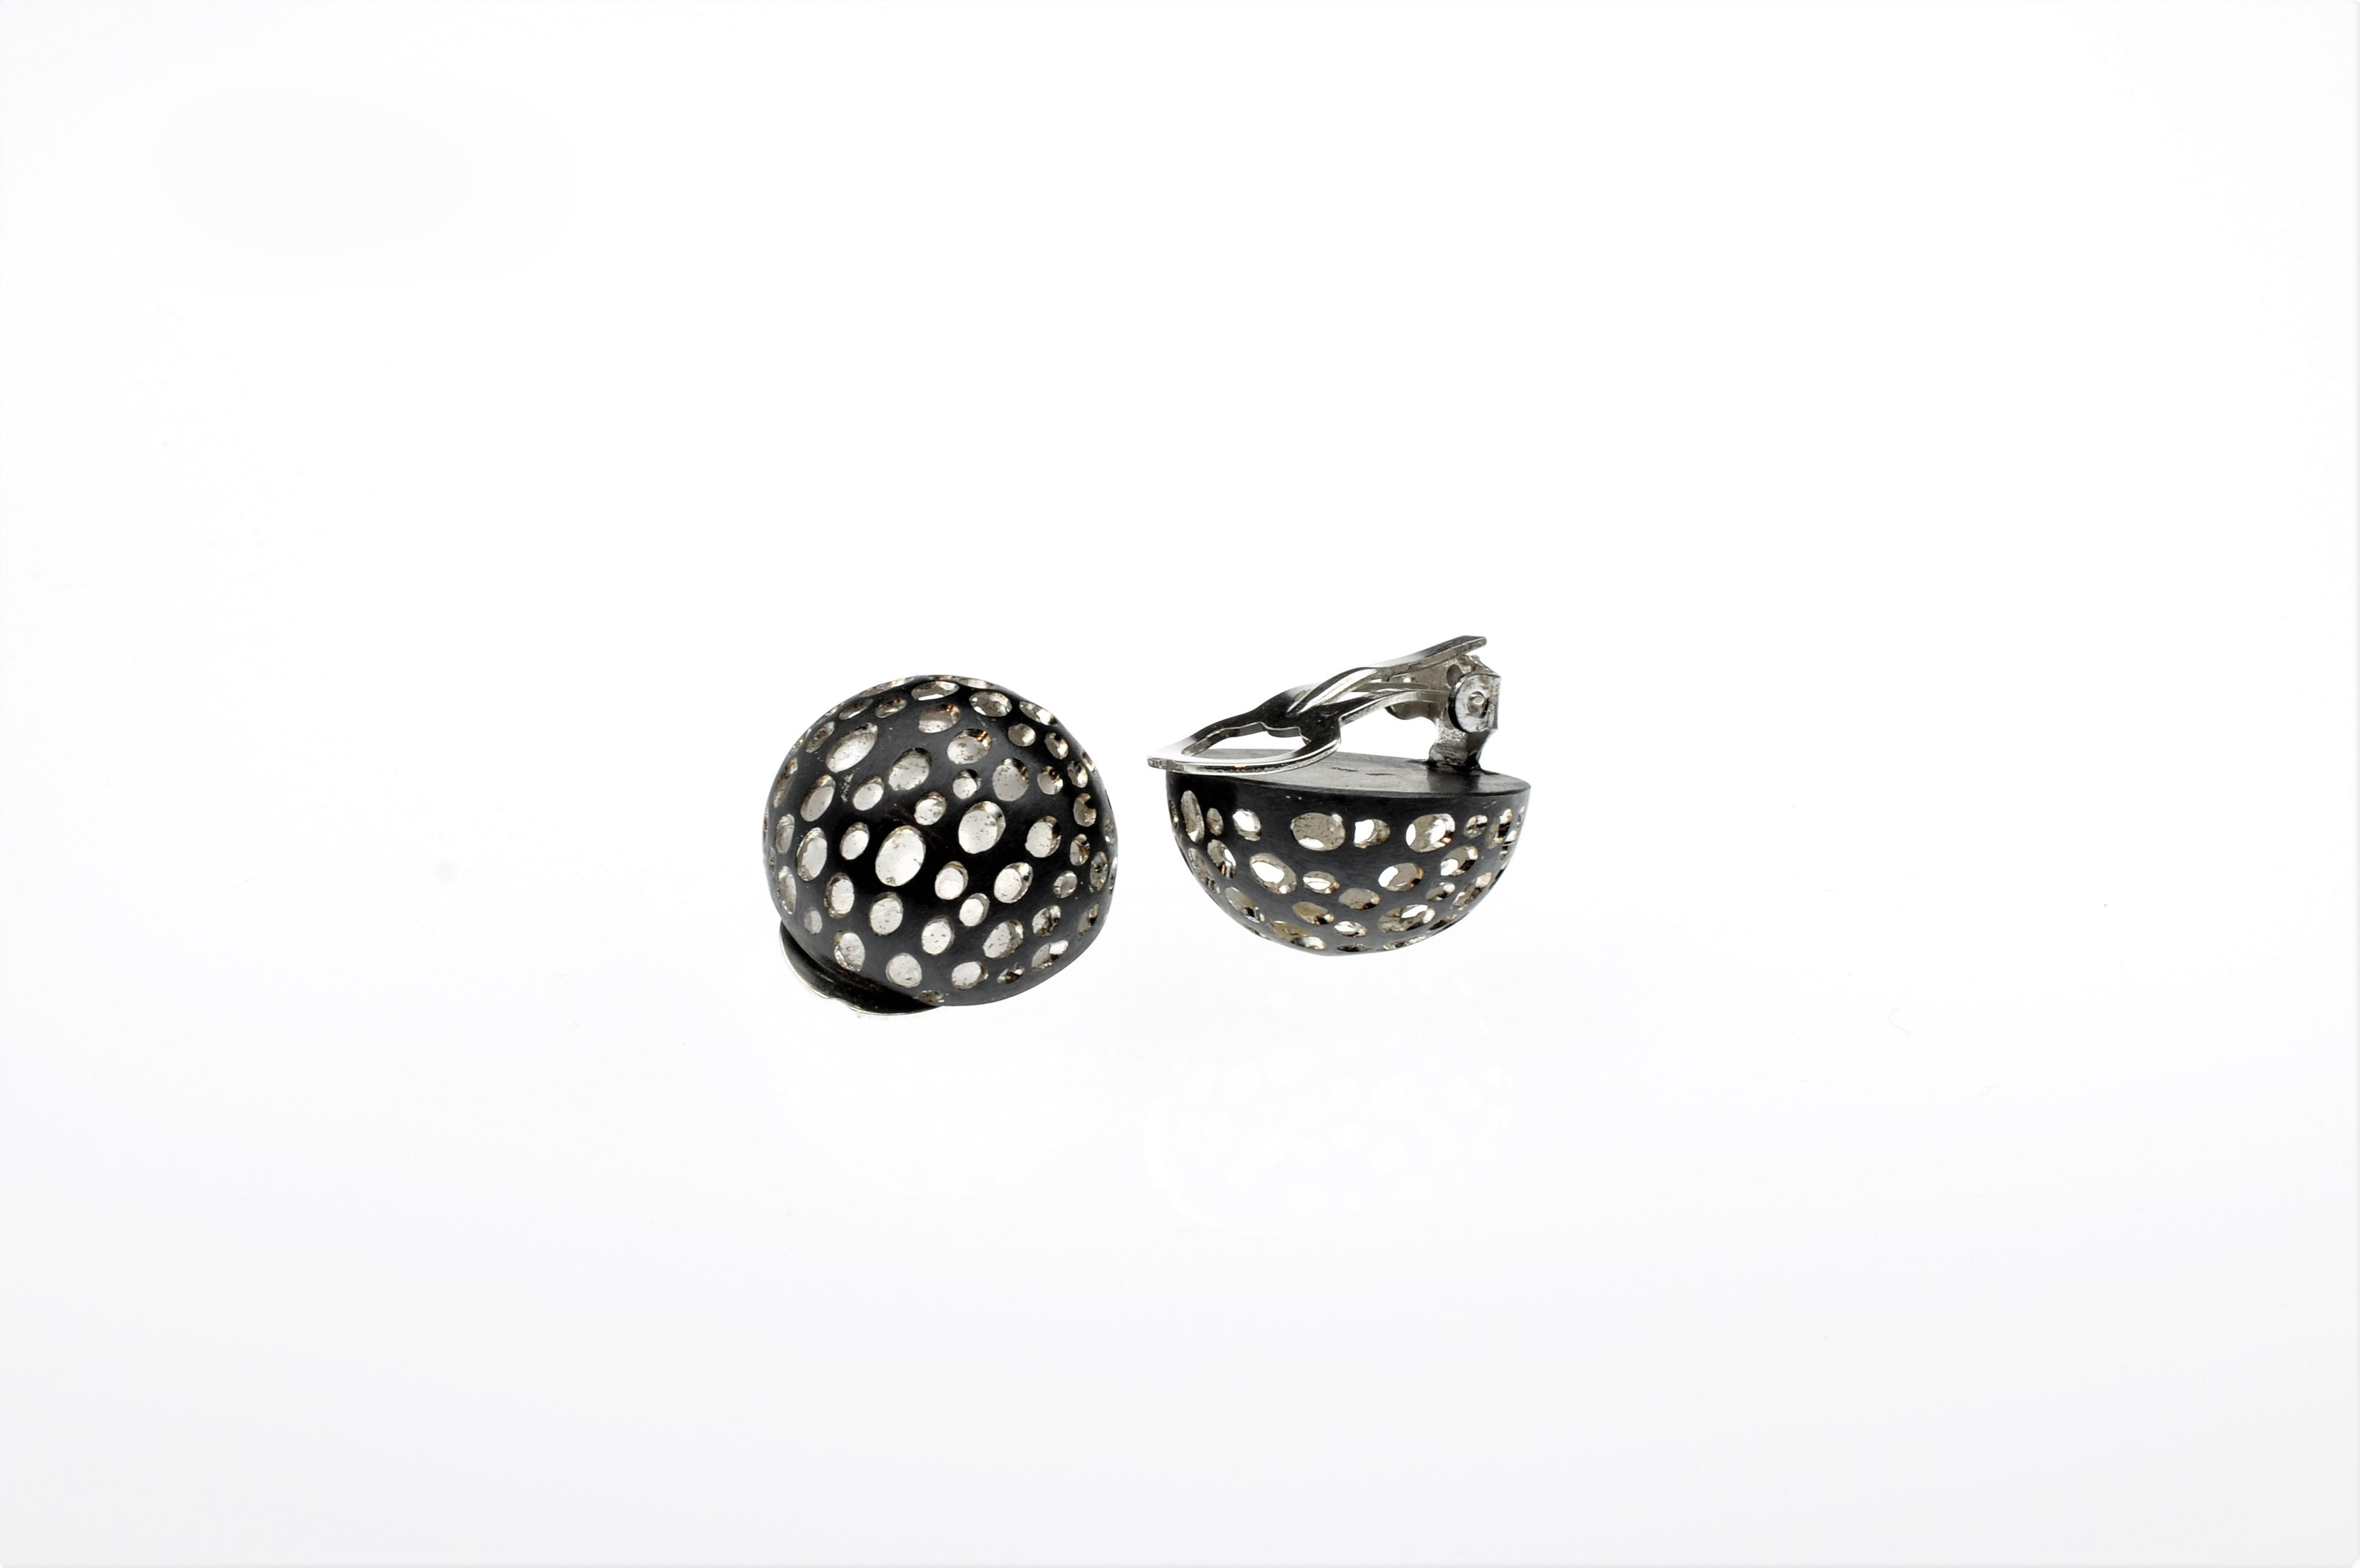 Oxidized Domed Clip Earrings with Sterling Silver Inset - BAS 55ib